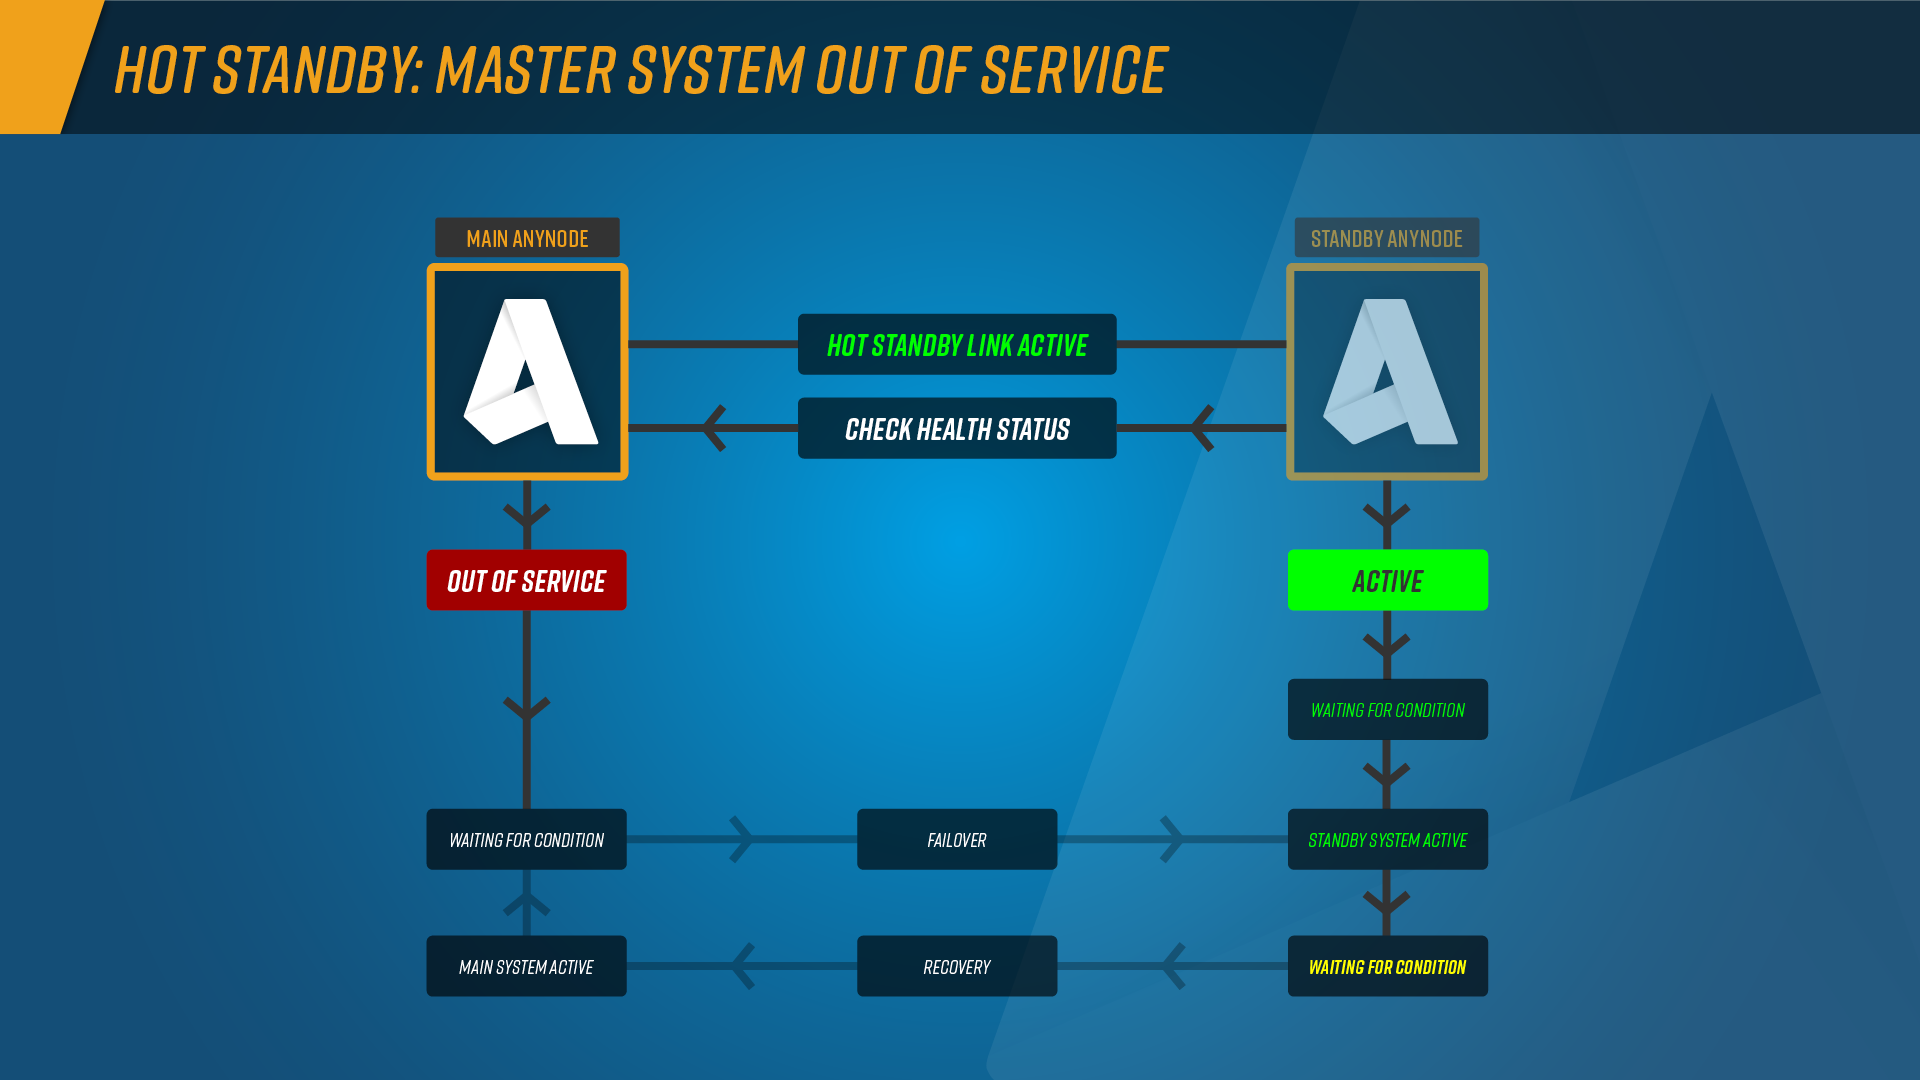 anynode infographic: Hot standby with two instances as part of a high-availability configuration. The primary system has been taken out of operation, and the secondary system has assumed all tasks. We are now waiting for the condition to recover back to the primary system.